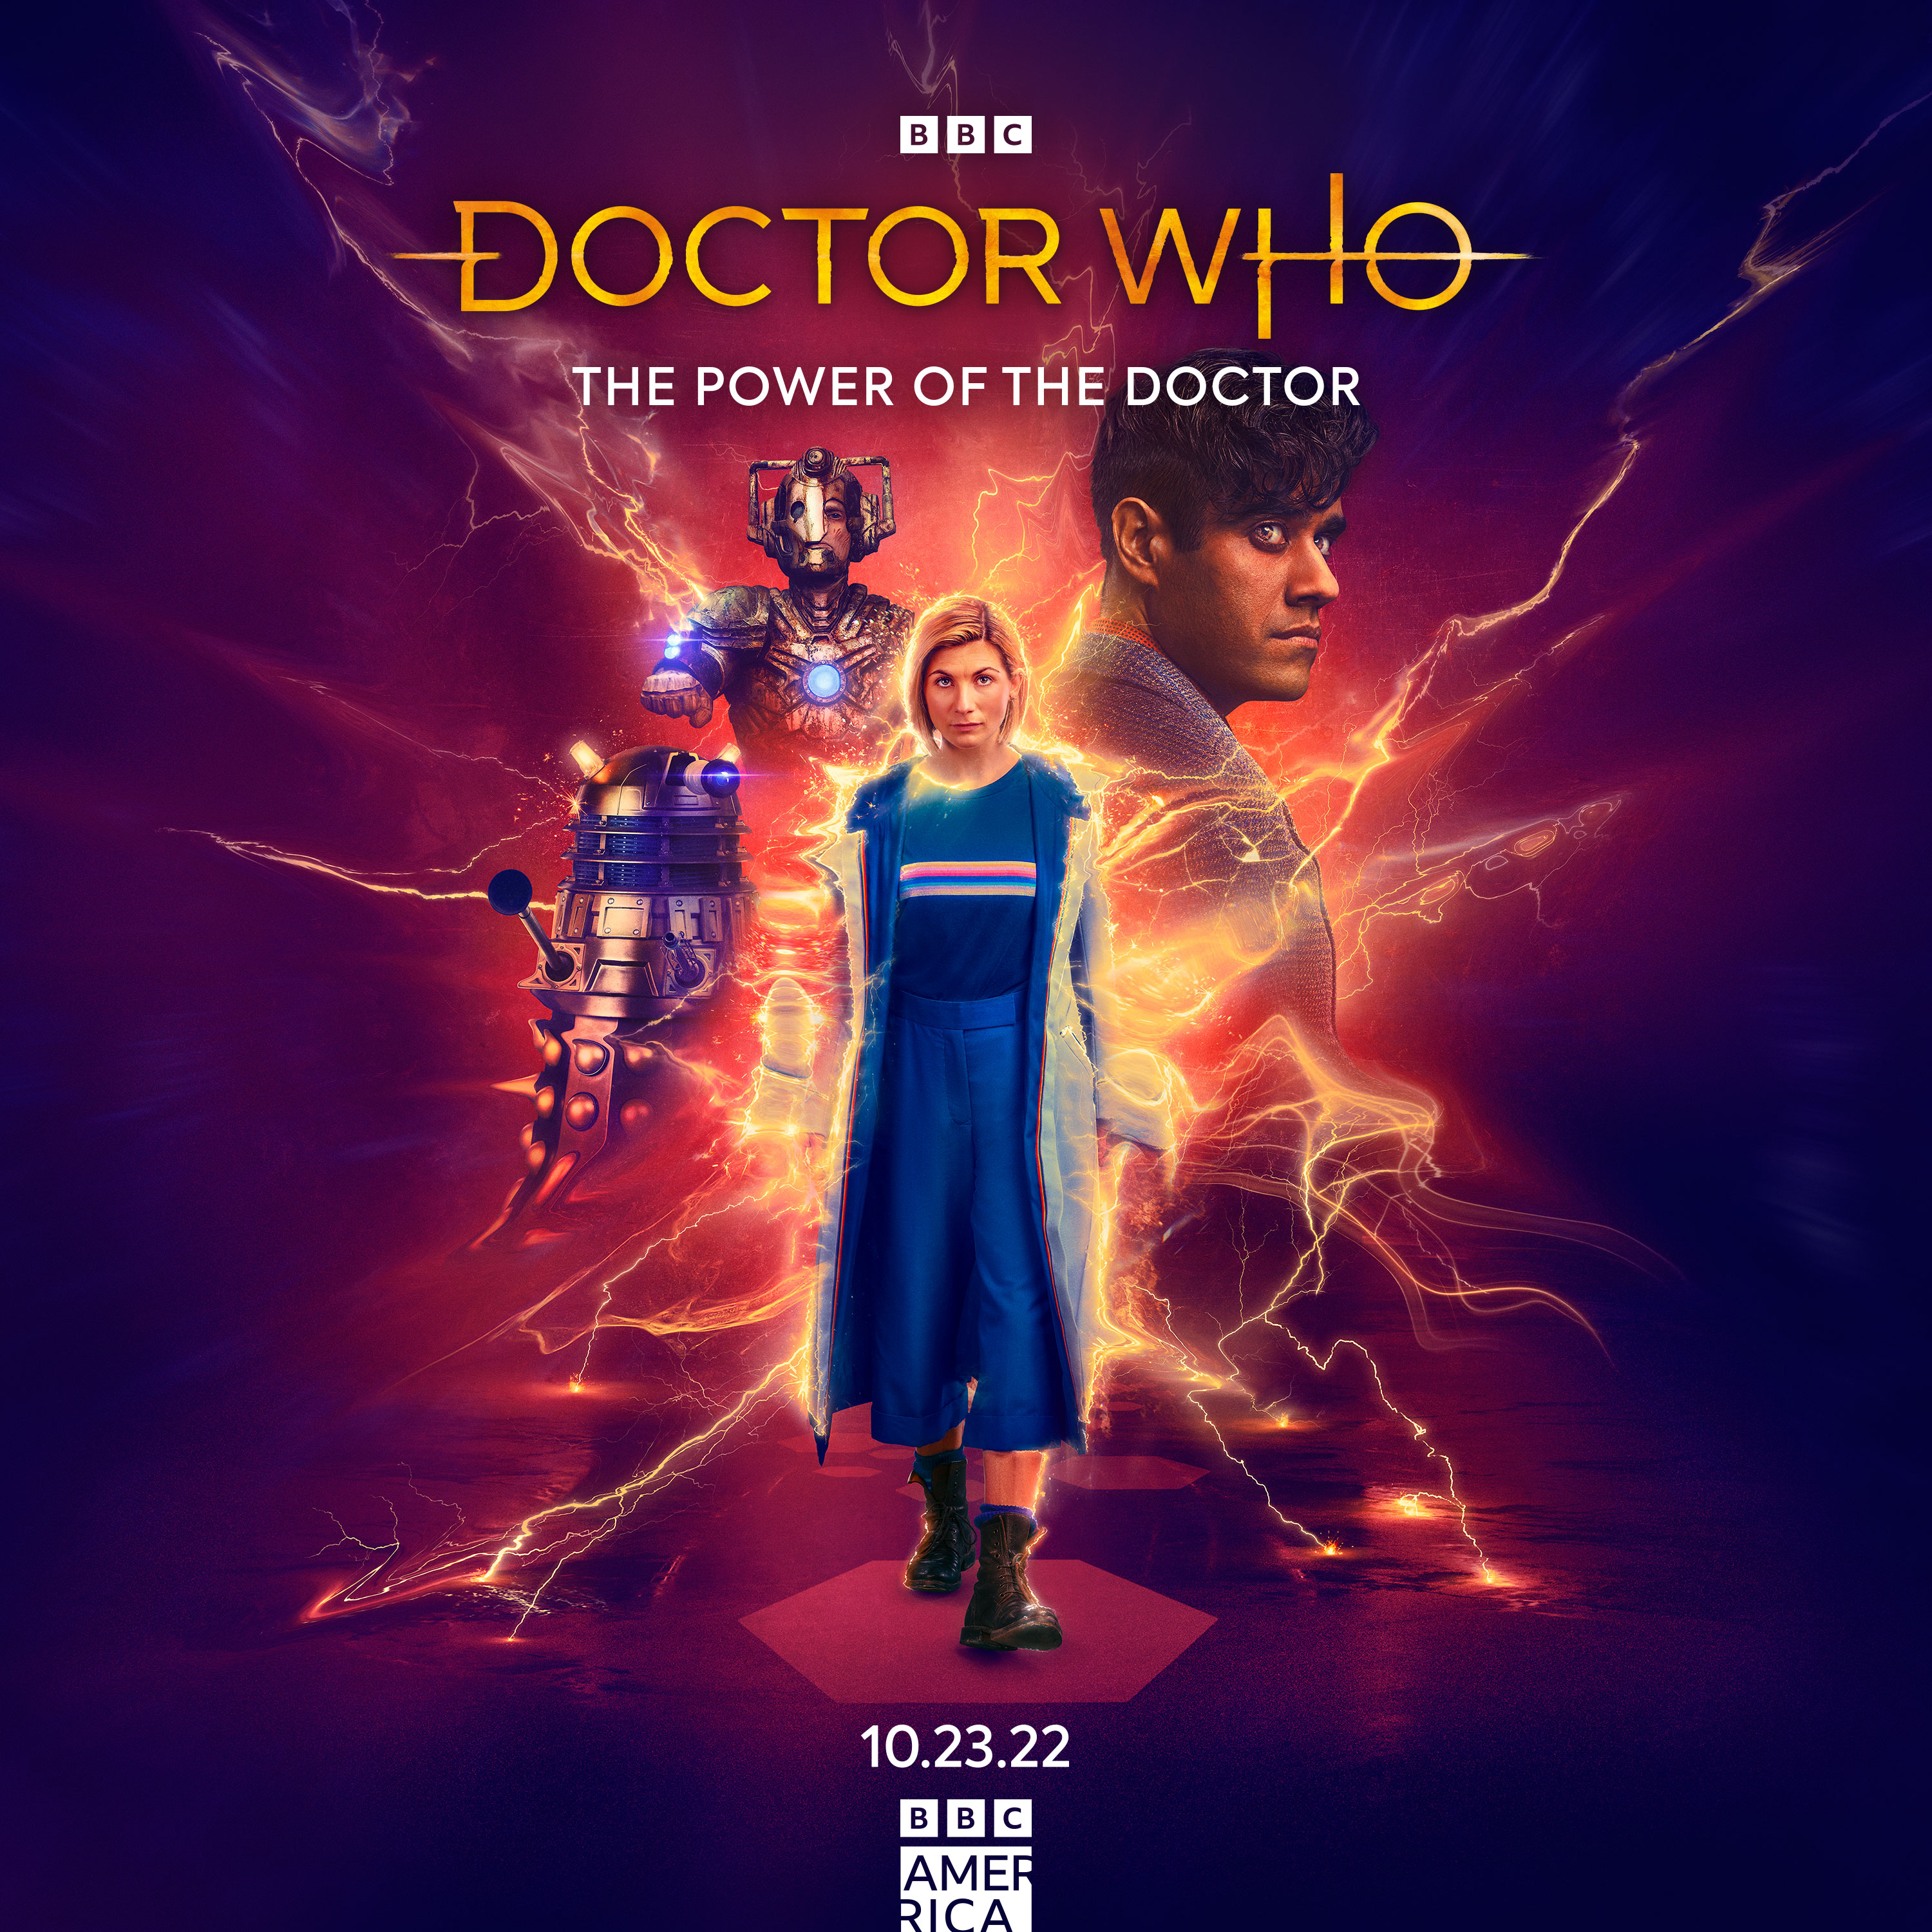 Doctor Who (2022 specials) - Wikipedia